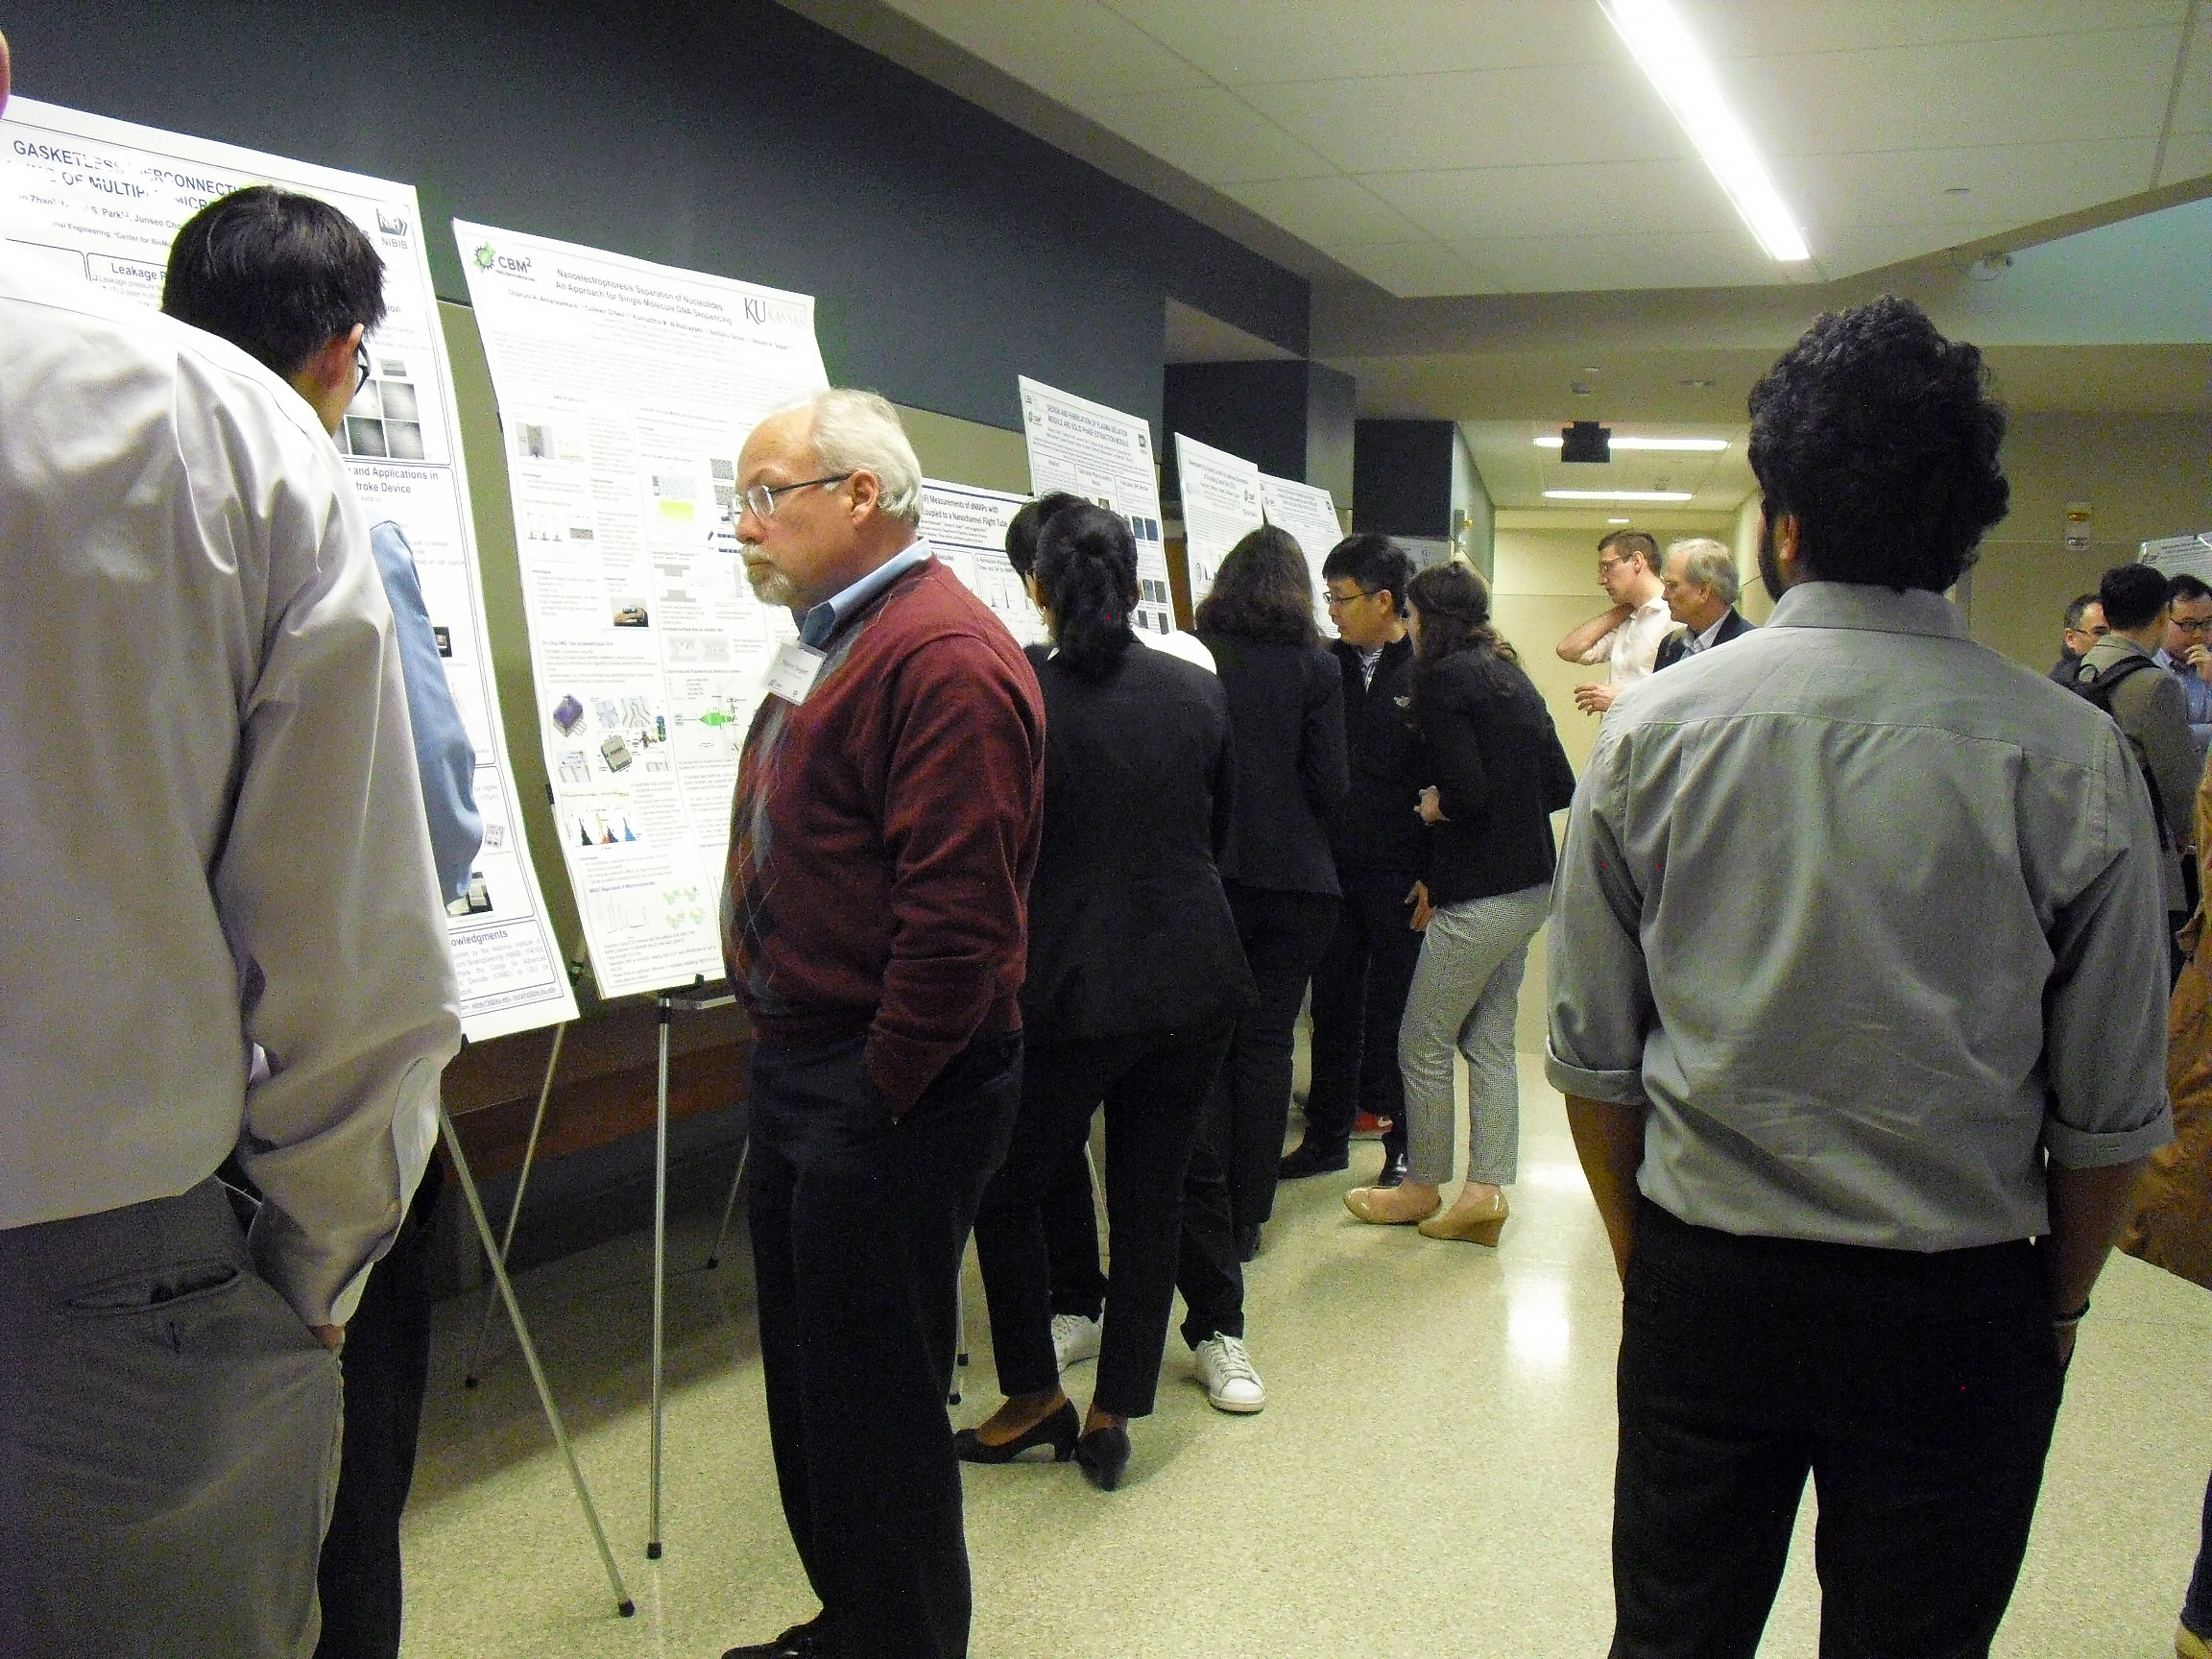 Individual presenting key points on a research poster to Dr. Soper in a focused discussion.